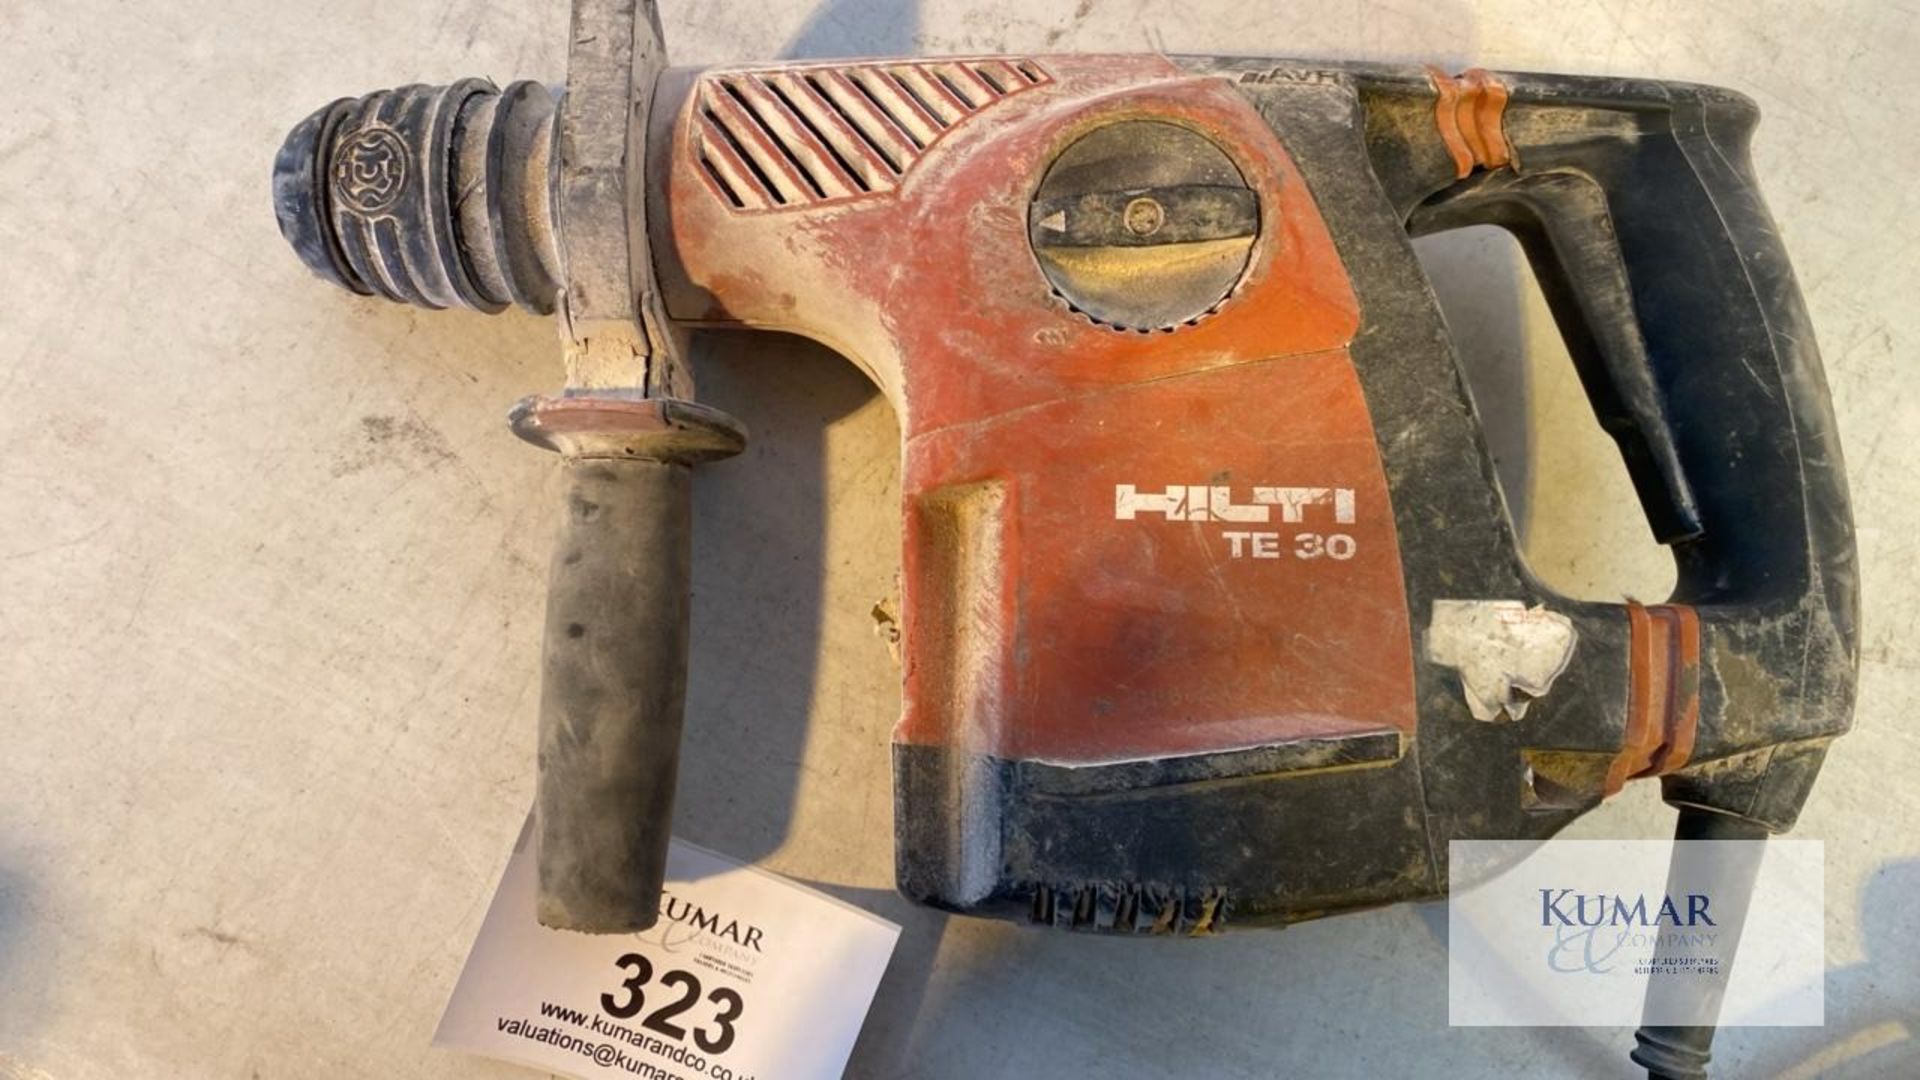 Hilti TE 30 - C SDS 110 Volt Rotary Hammer Drill, Serial No. N/A - Image 2 of 3